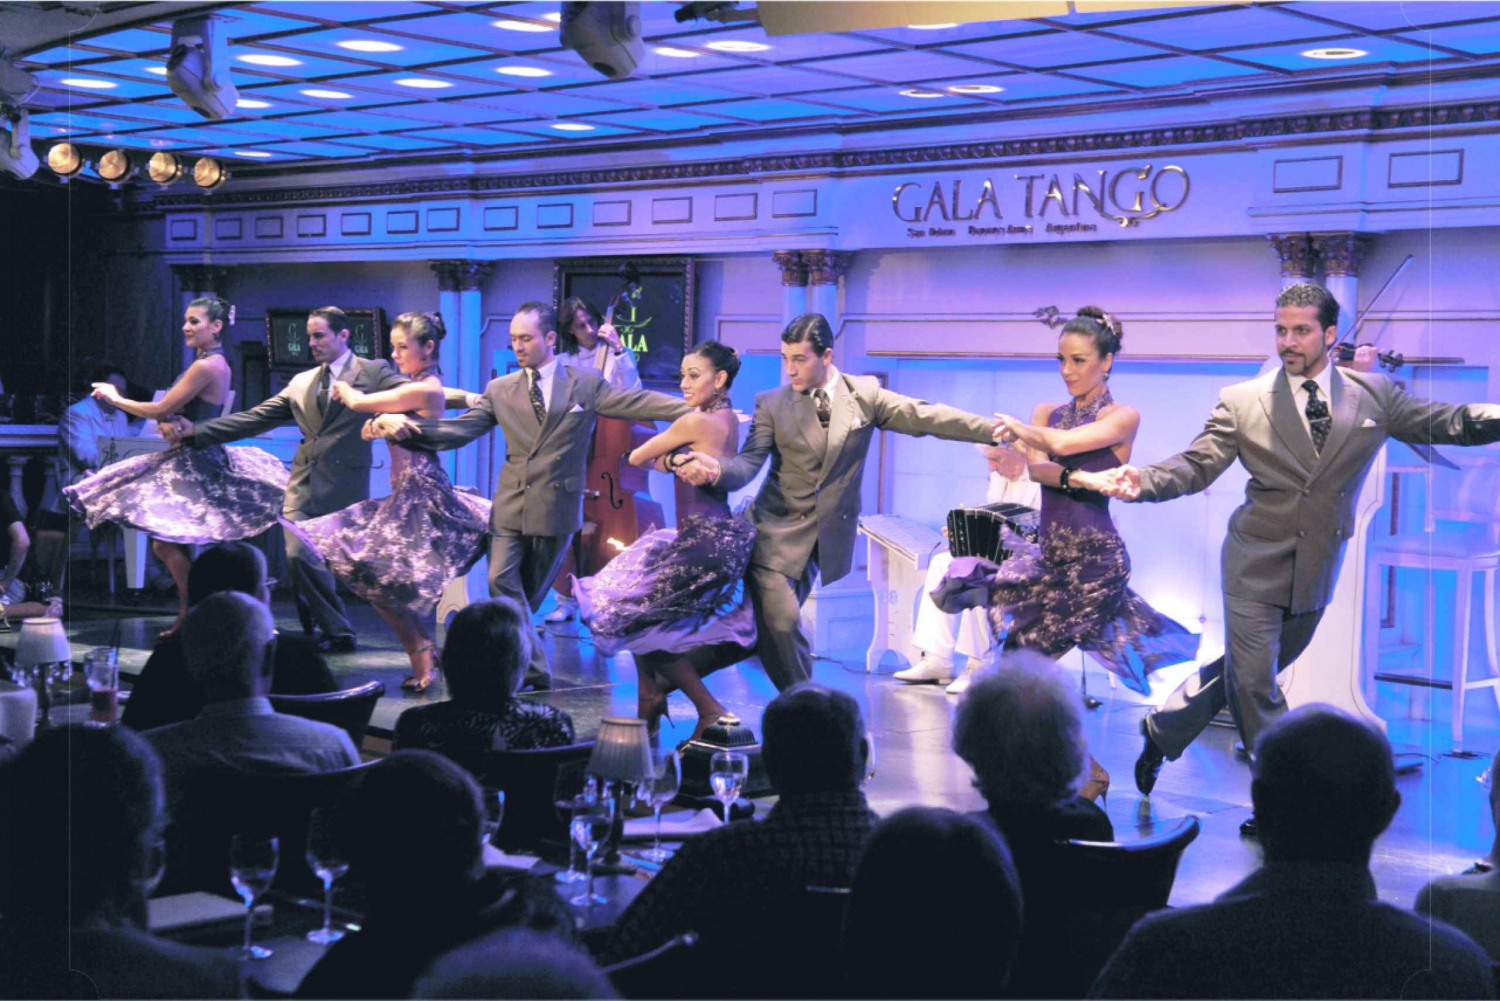 From Buenos Aires: Gala Tango Show Ticket with Upgrades